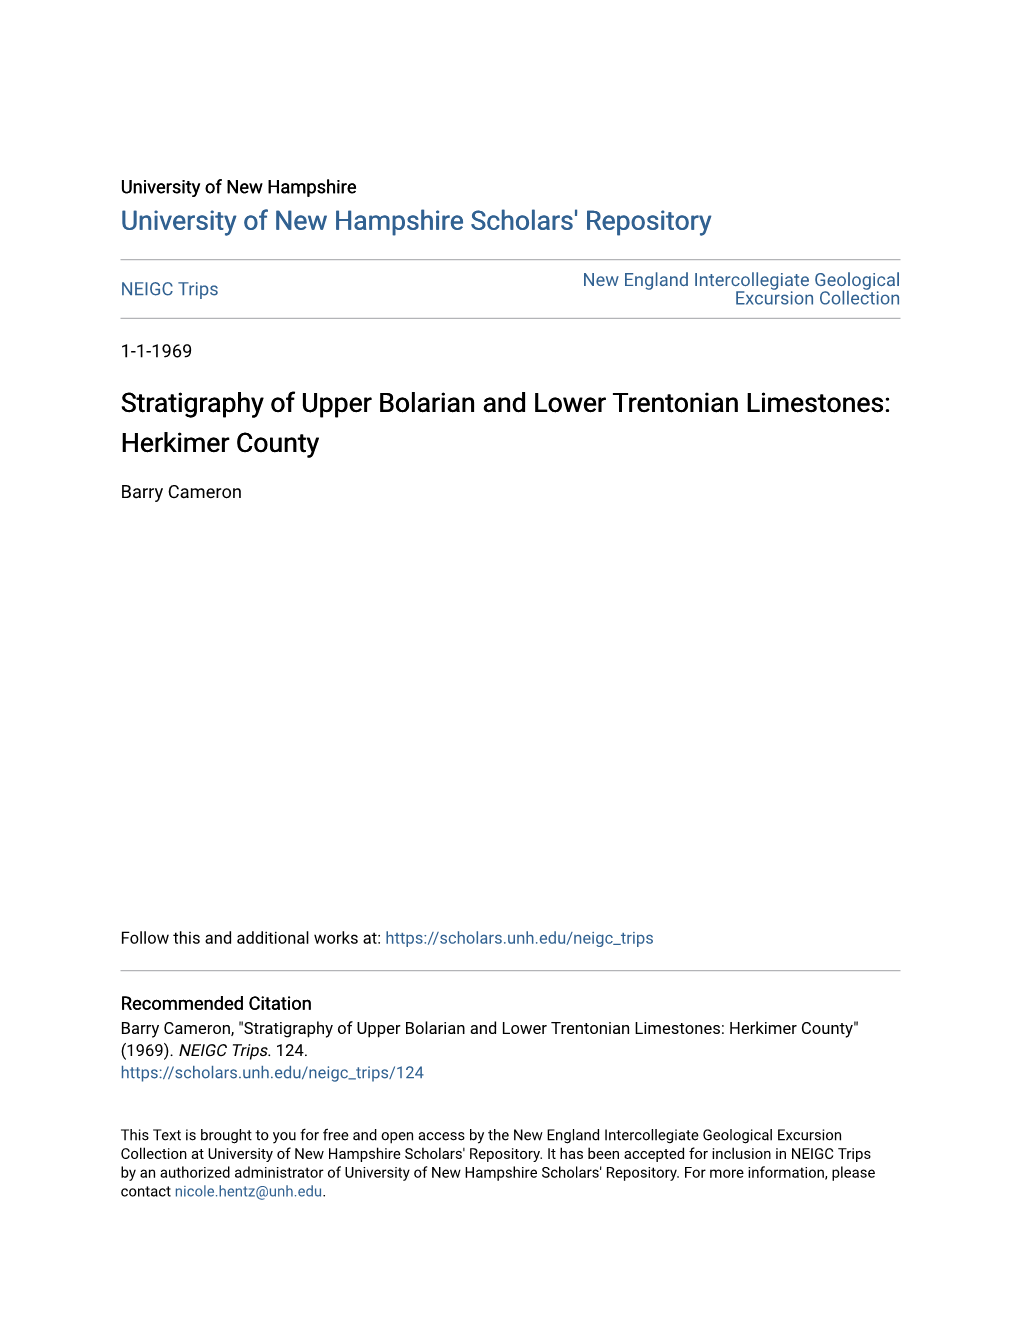 Stratigraphy of Upper Bolarian and Lower Trentonian Limestones: Herkimer County